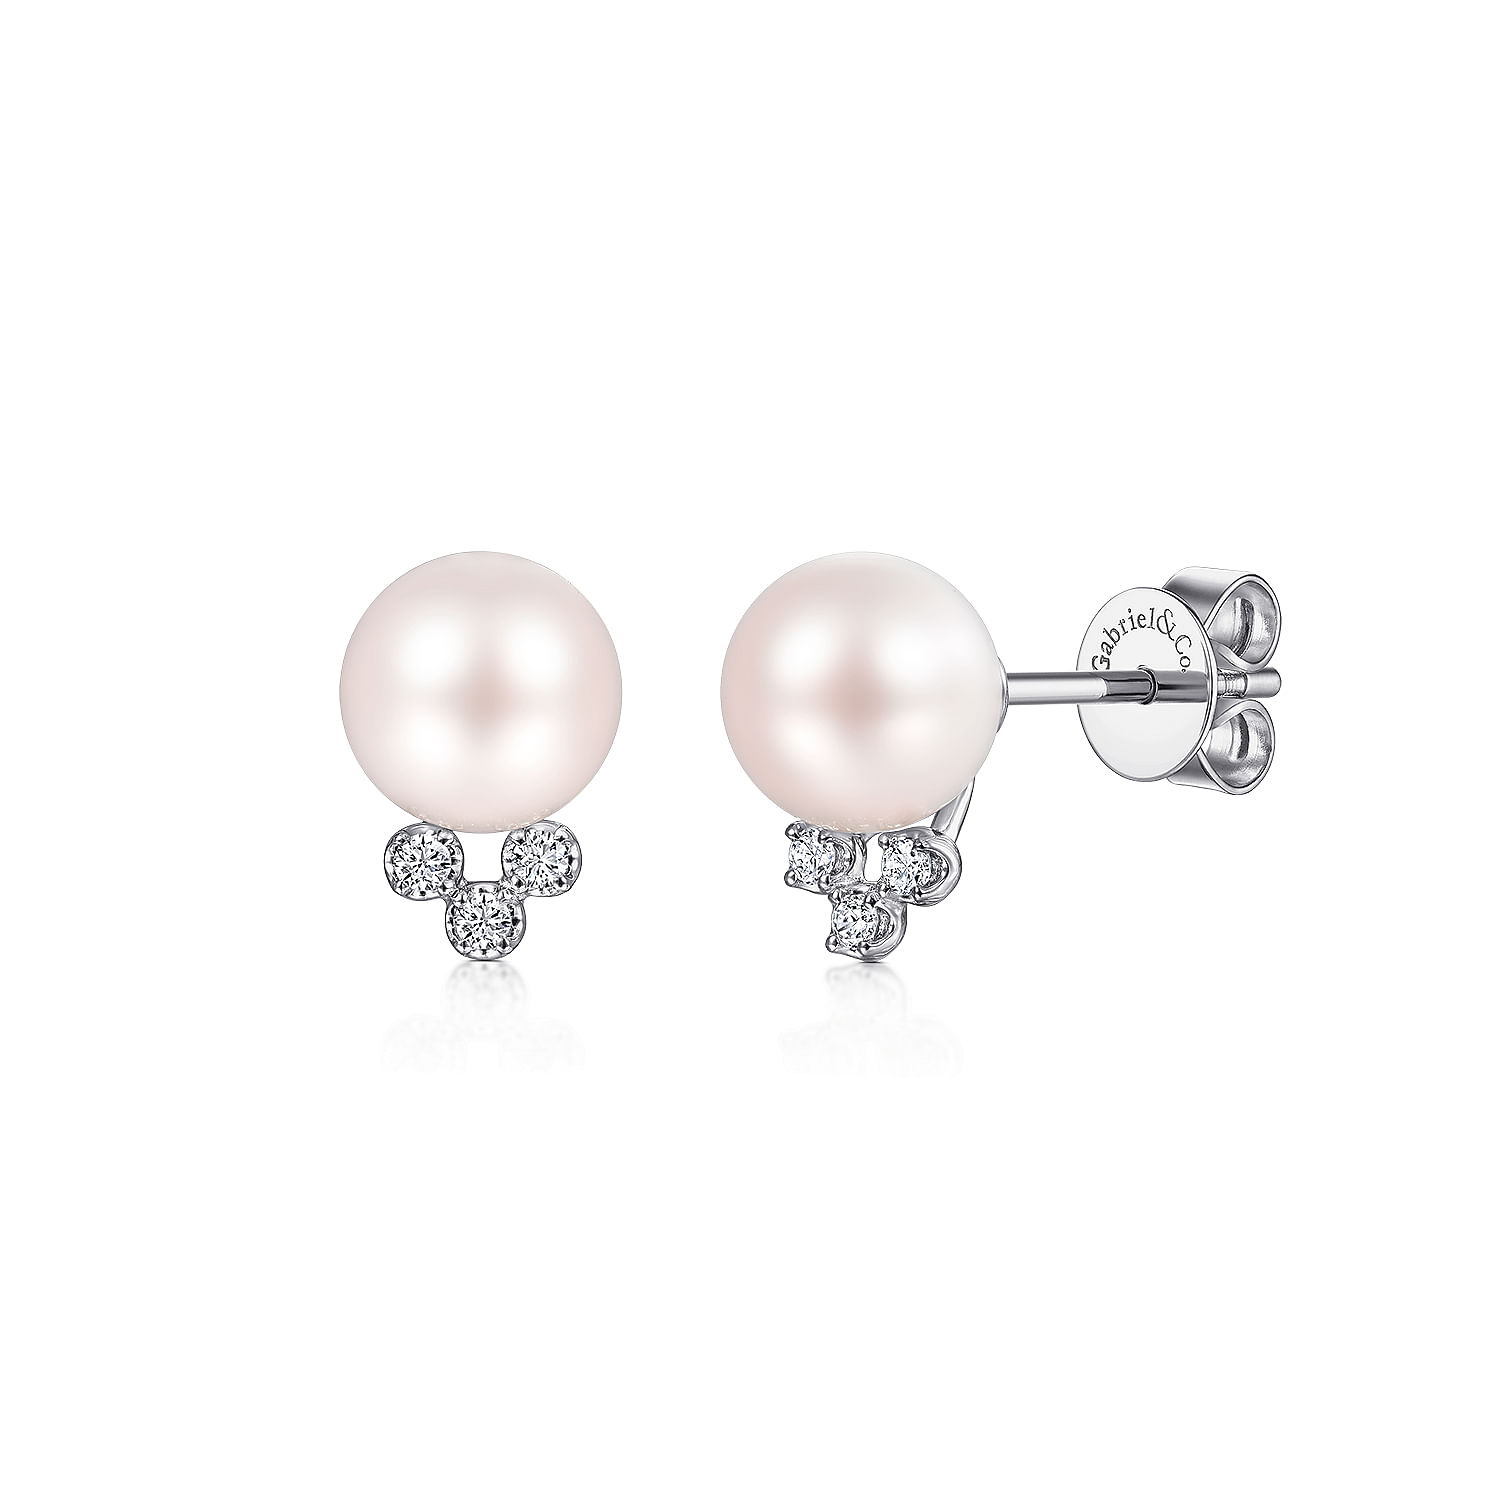 14K White Gold Pearl Post Earrings With Diamond Accents